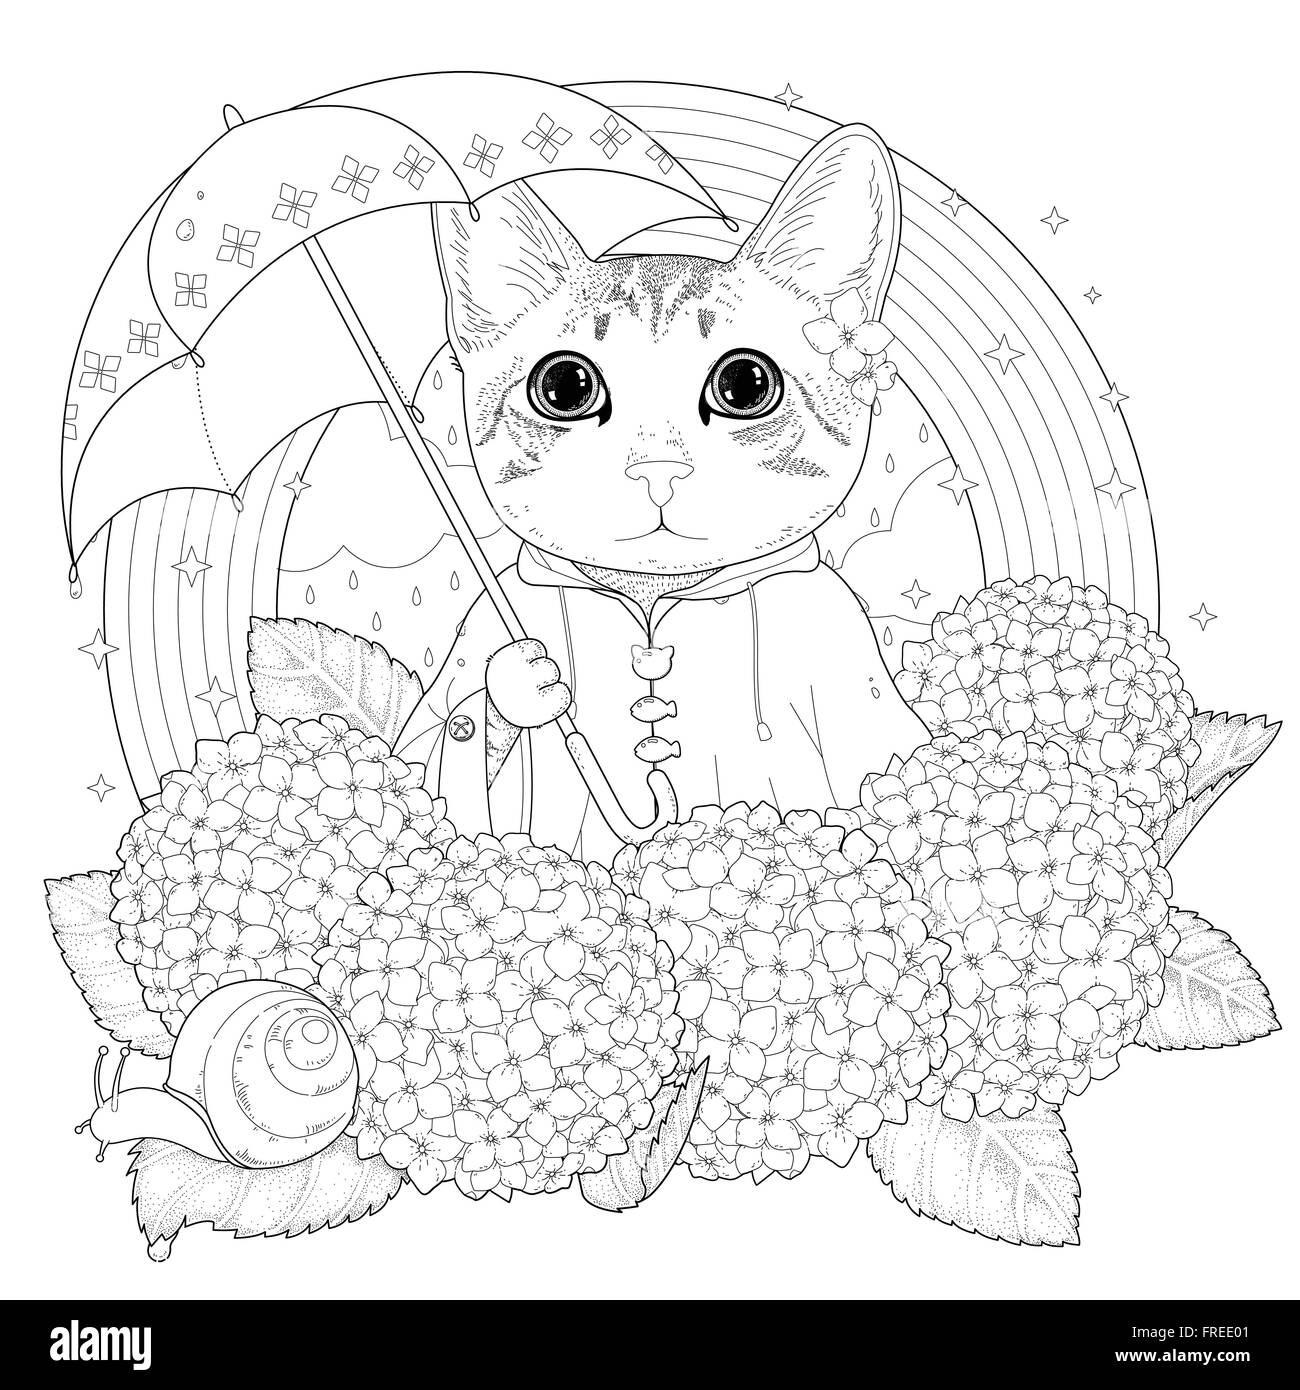 adorable kitty coloring page in exquisite style Stock Vector